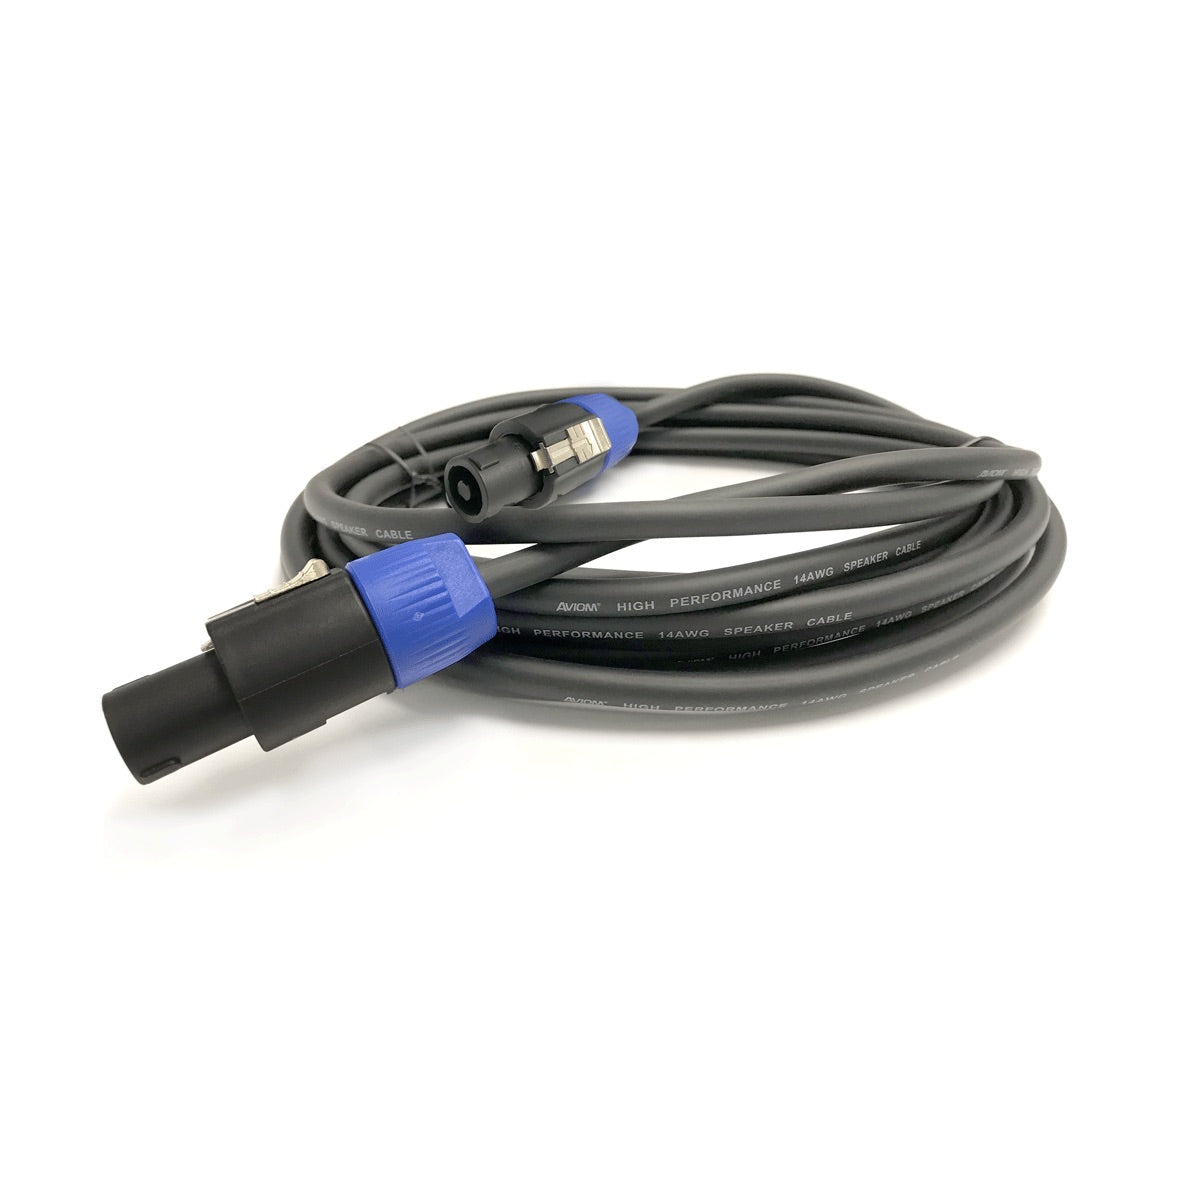 Aviom SPK-5 Speaker Cable with Locking Connectors